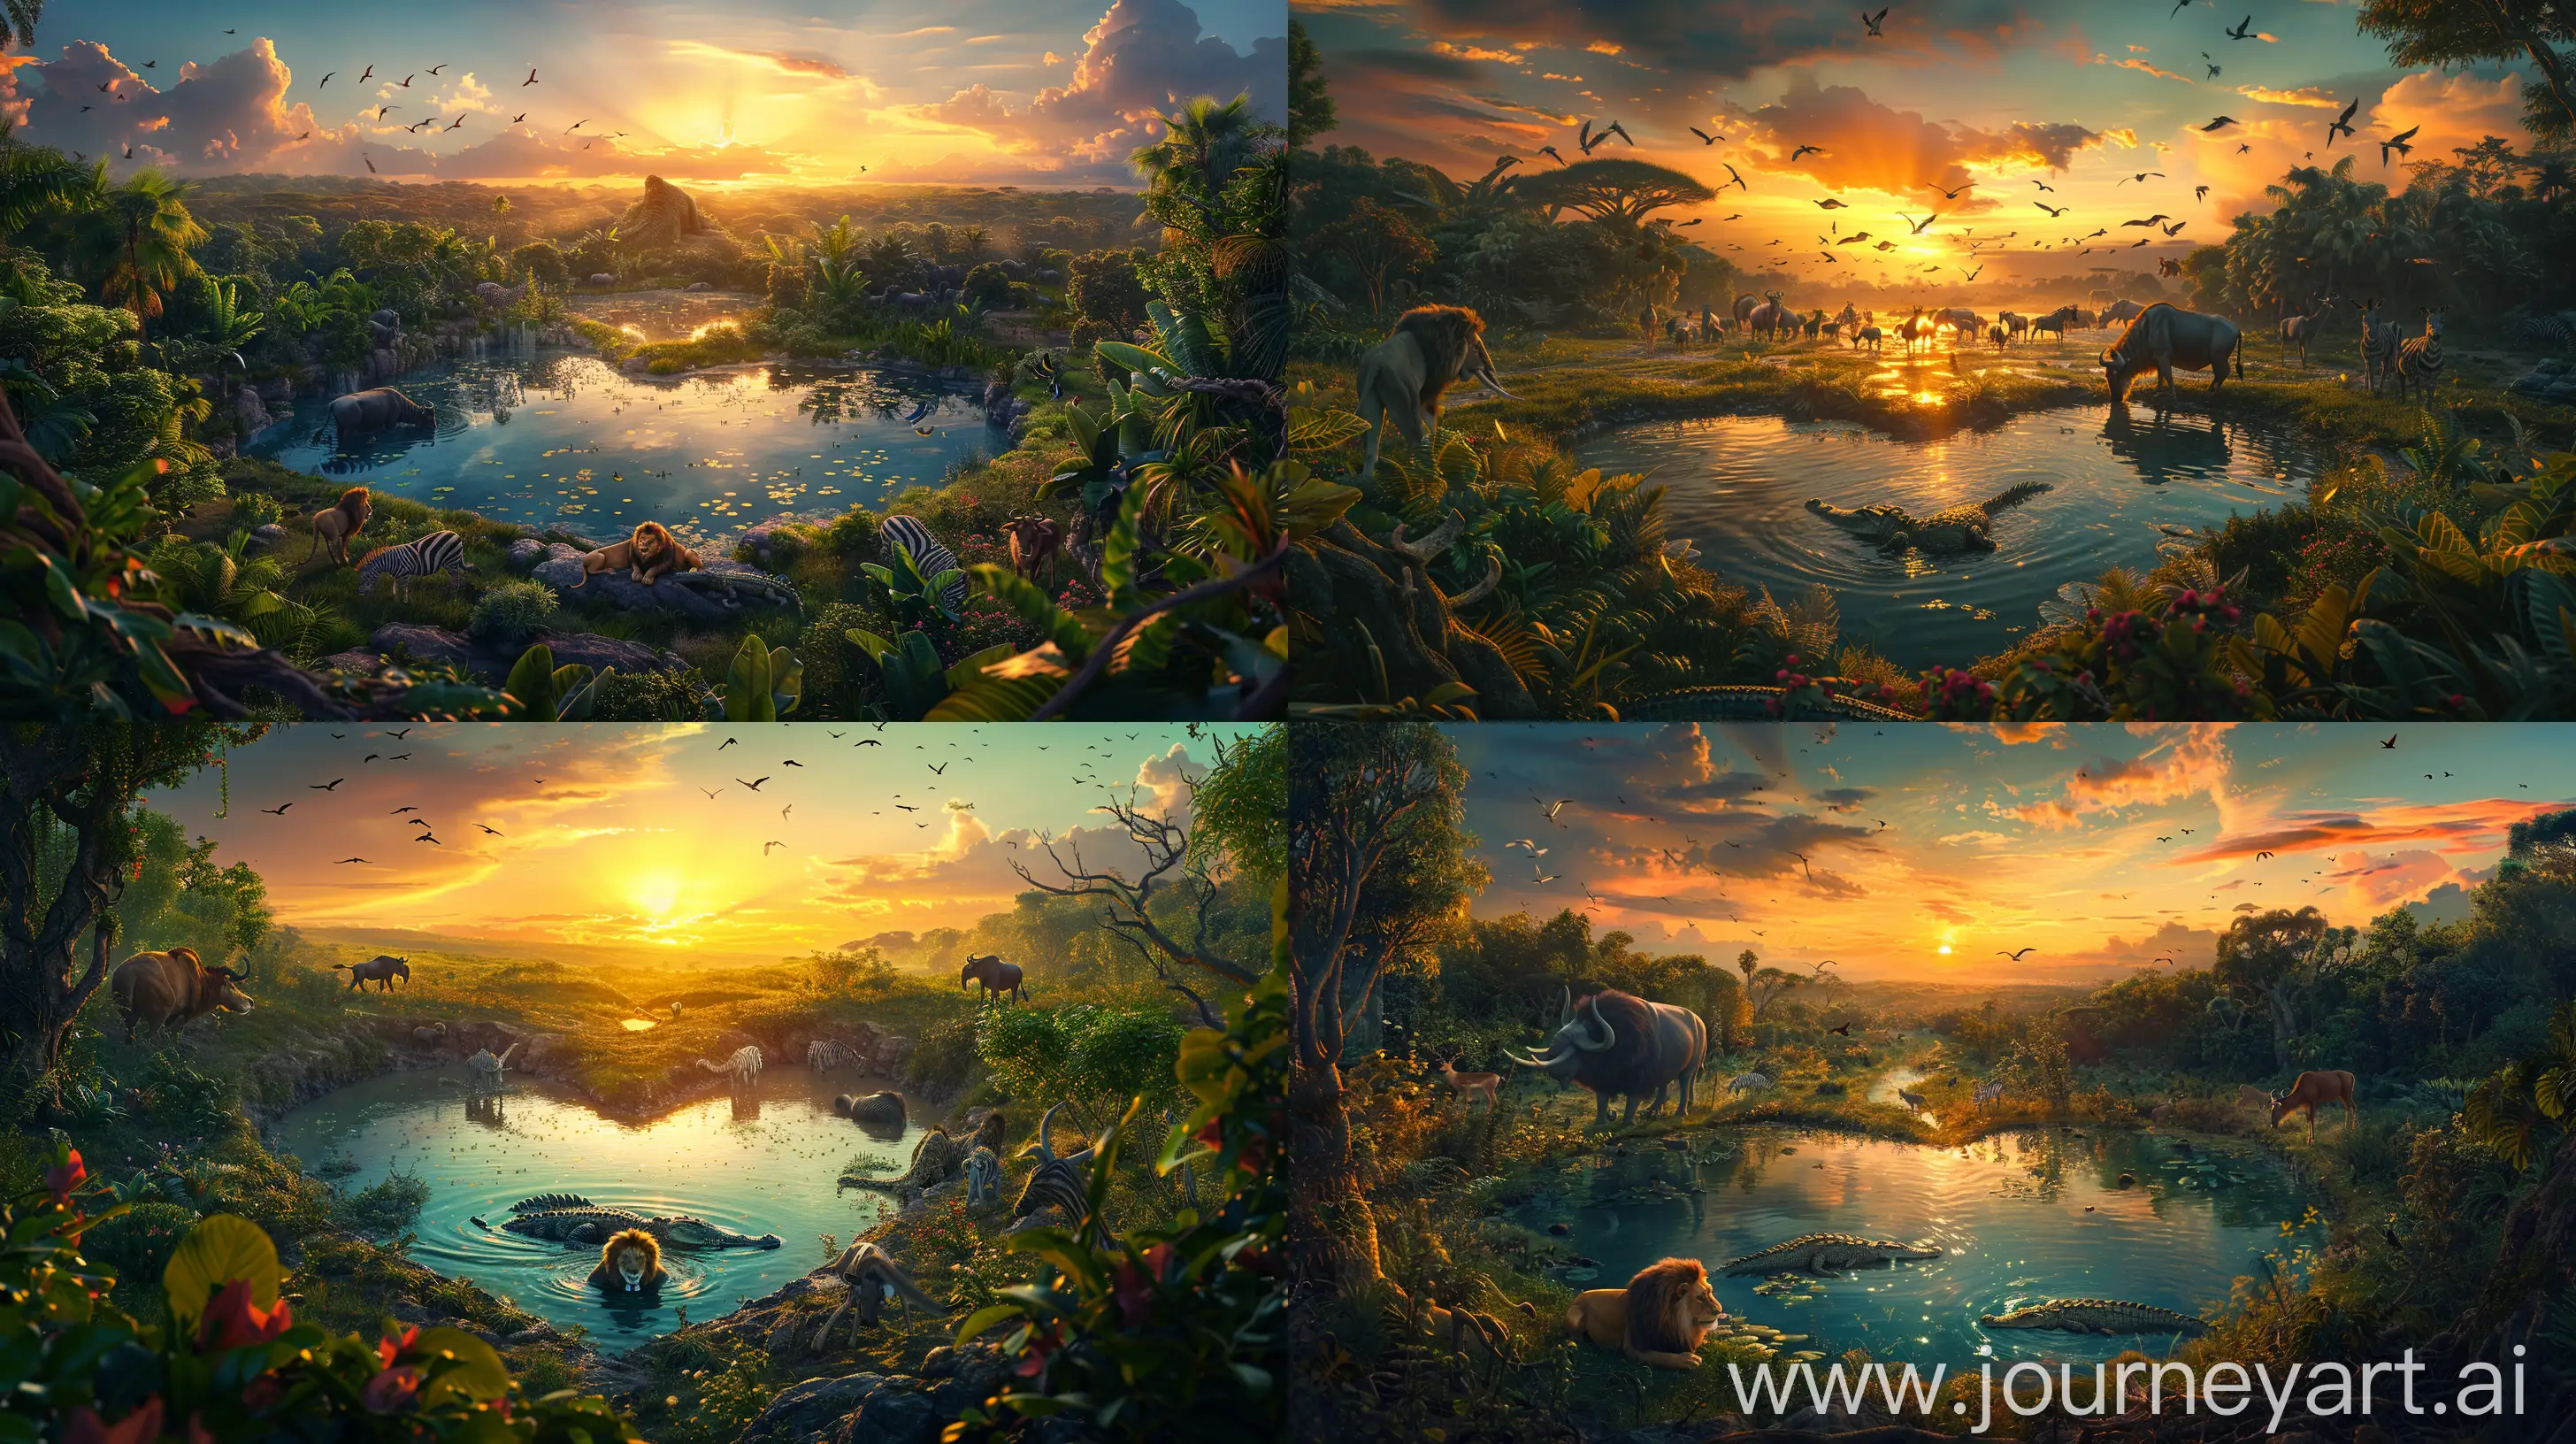  Serene jungle oasis, clear heart-shaped lake, lion, crocodile, elephant, zebra, buffalo peacefully drinking, vibrant birds in sky, distant grazing deer, setting sun glow, picturesque, Disney's The Lion King 2019 movie inspired, panoramic view --ar 16:9 --s 300 --v 6